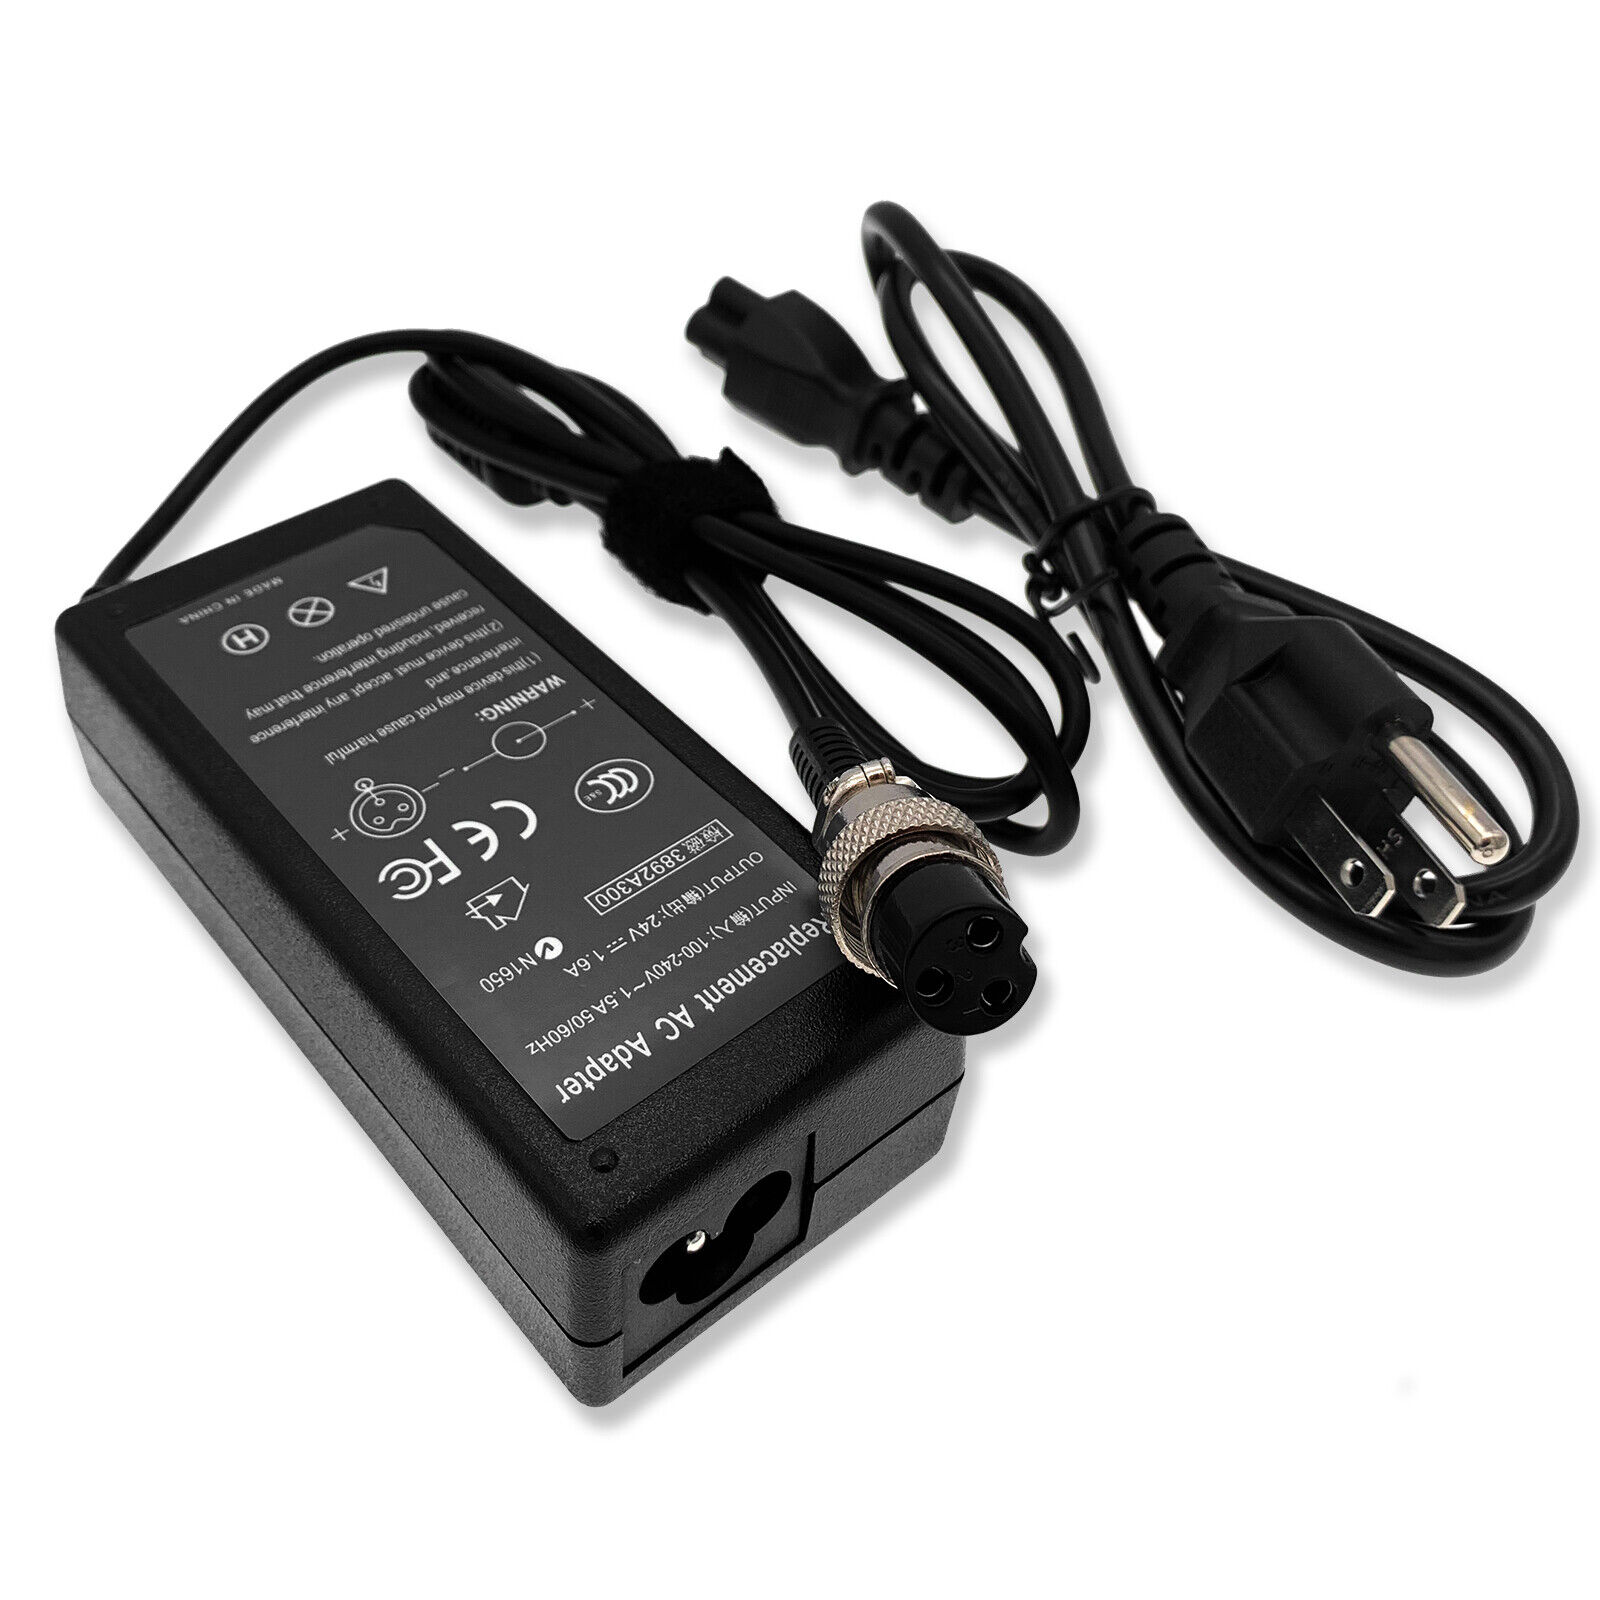 New Scooter Bike Battery Charger for Razor MX350 MX400 E100 Electric Dirt Rocket